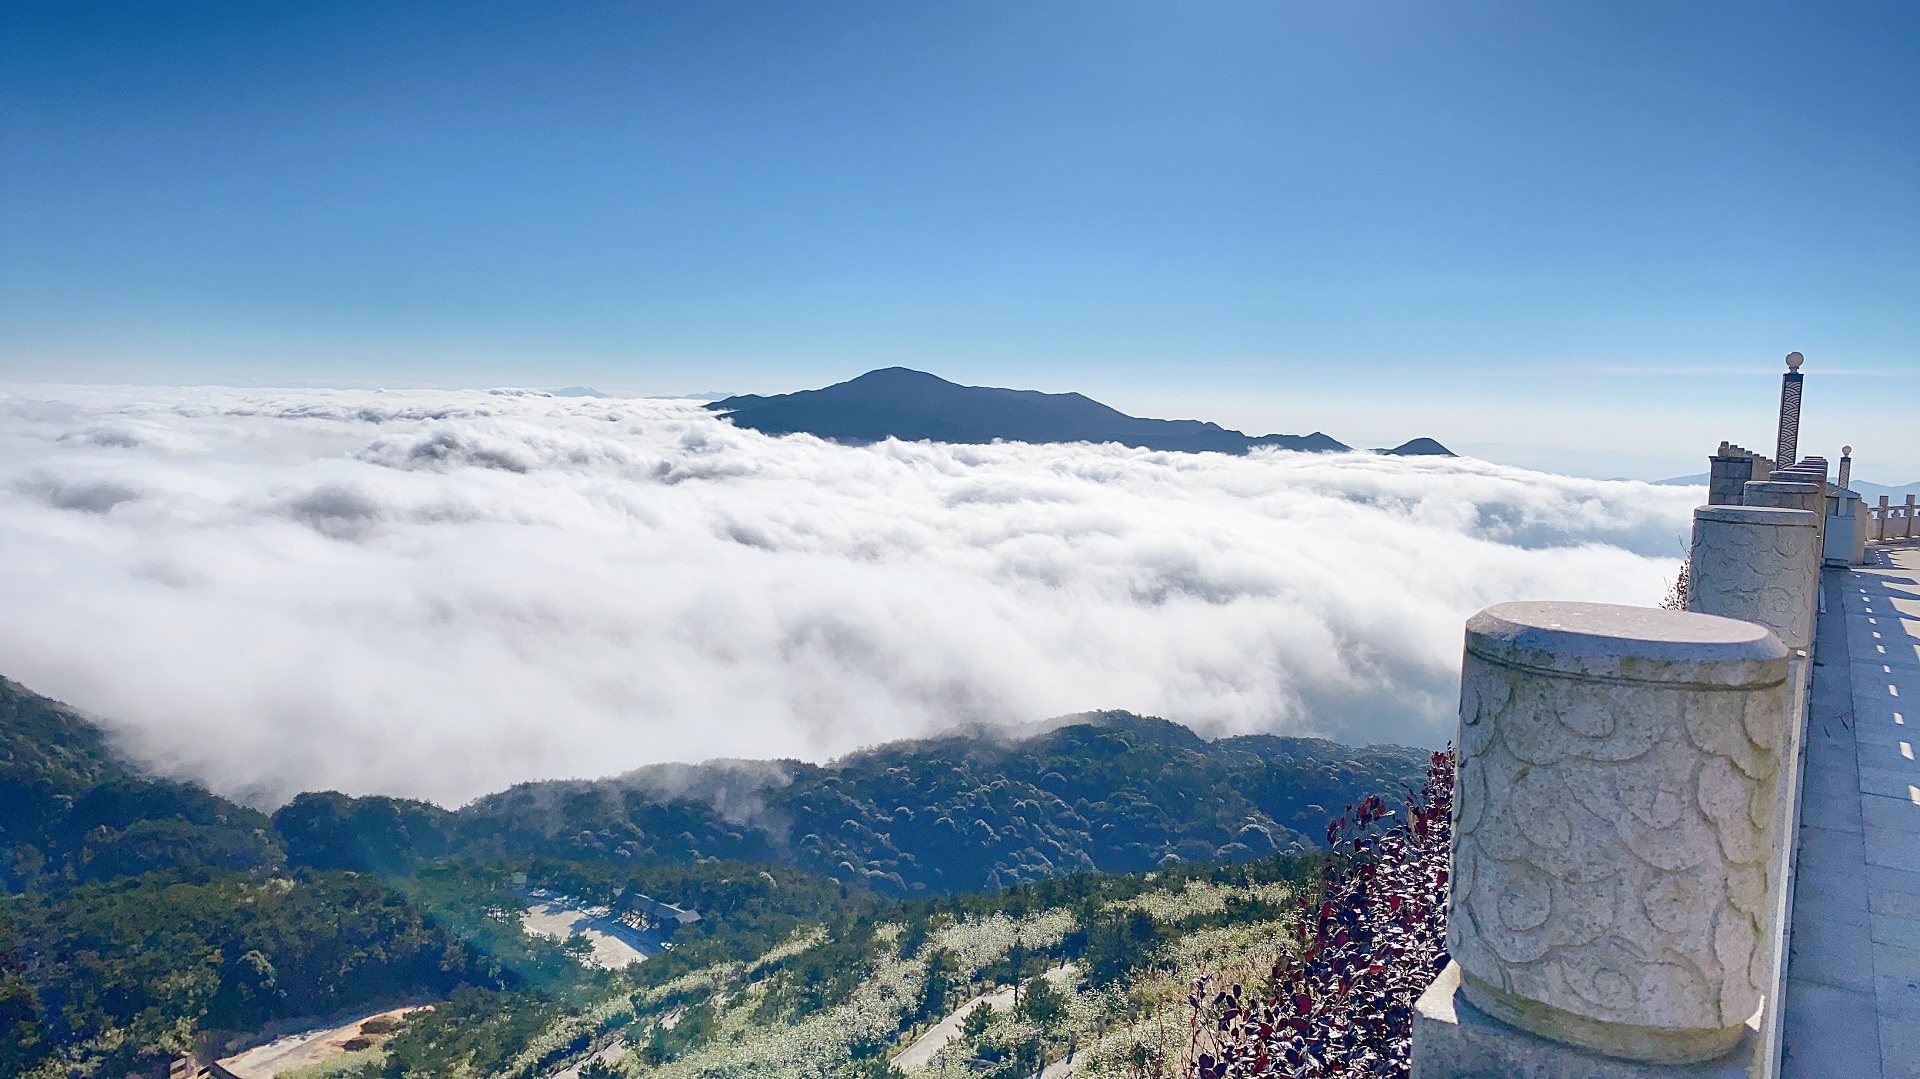 Magnificent Jiuxian Mountain bathed in sea of clouds